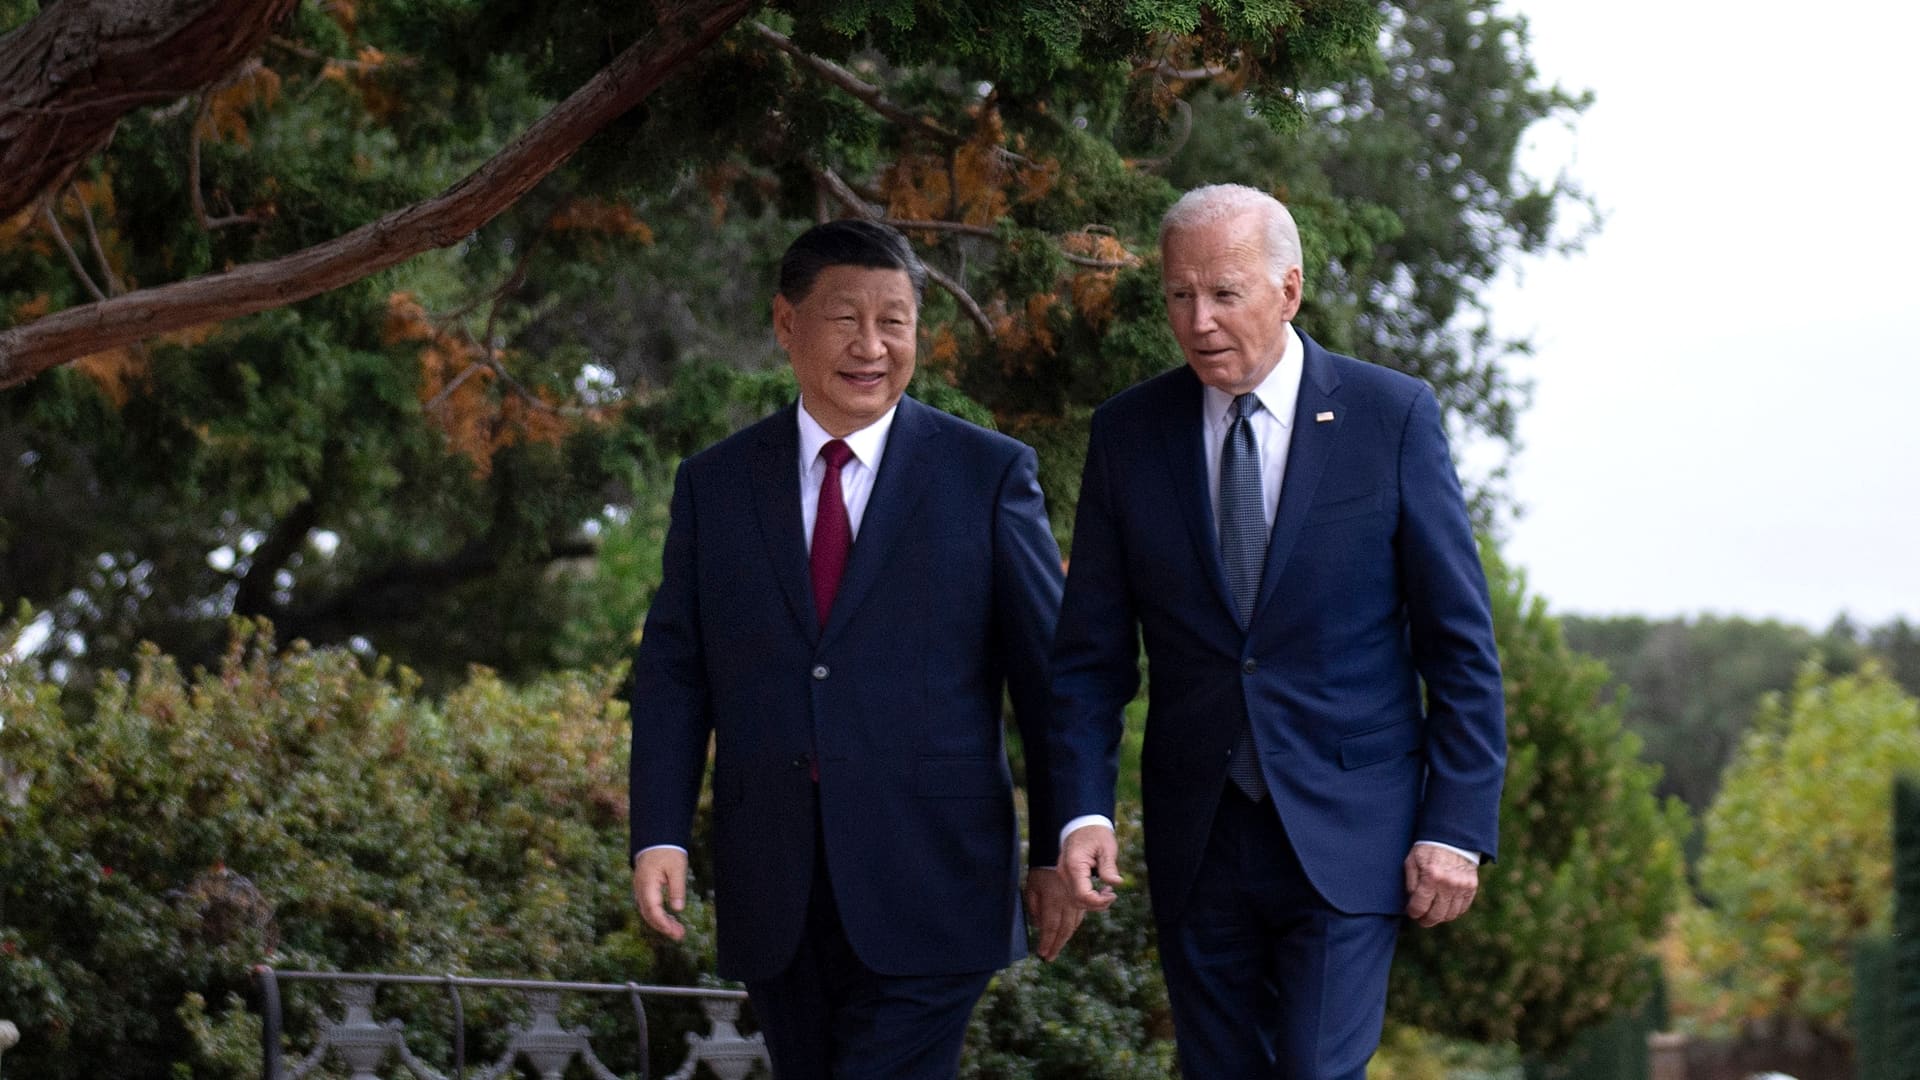 U.S. and China conform to resume defense pressure talks. Takeaways from the Biden-Xi summit